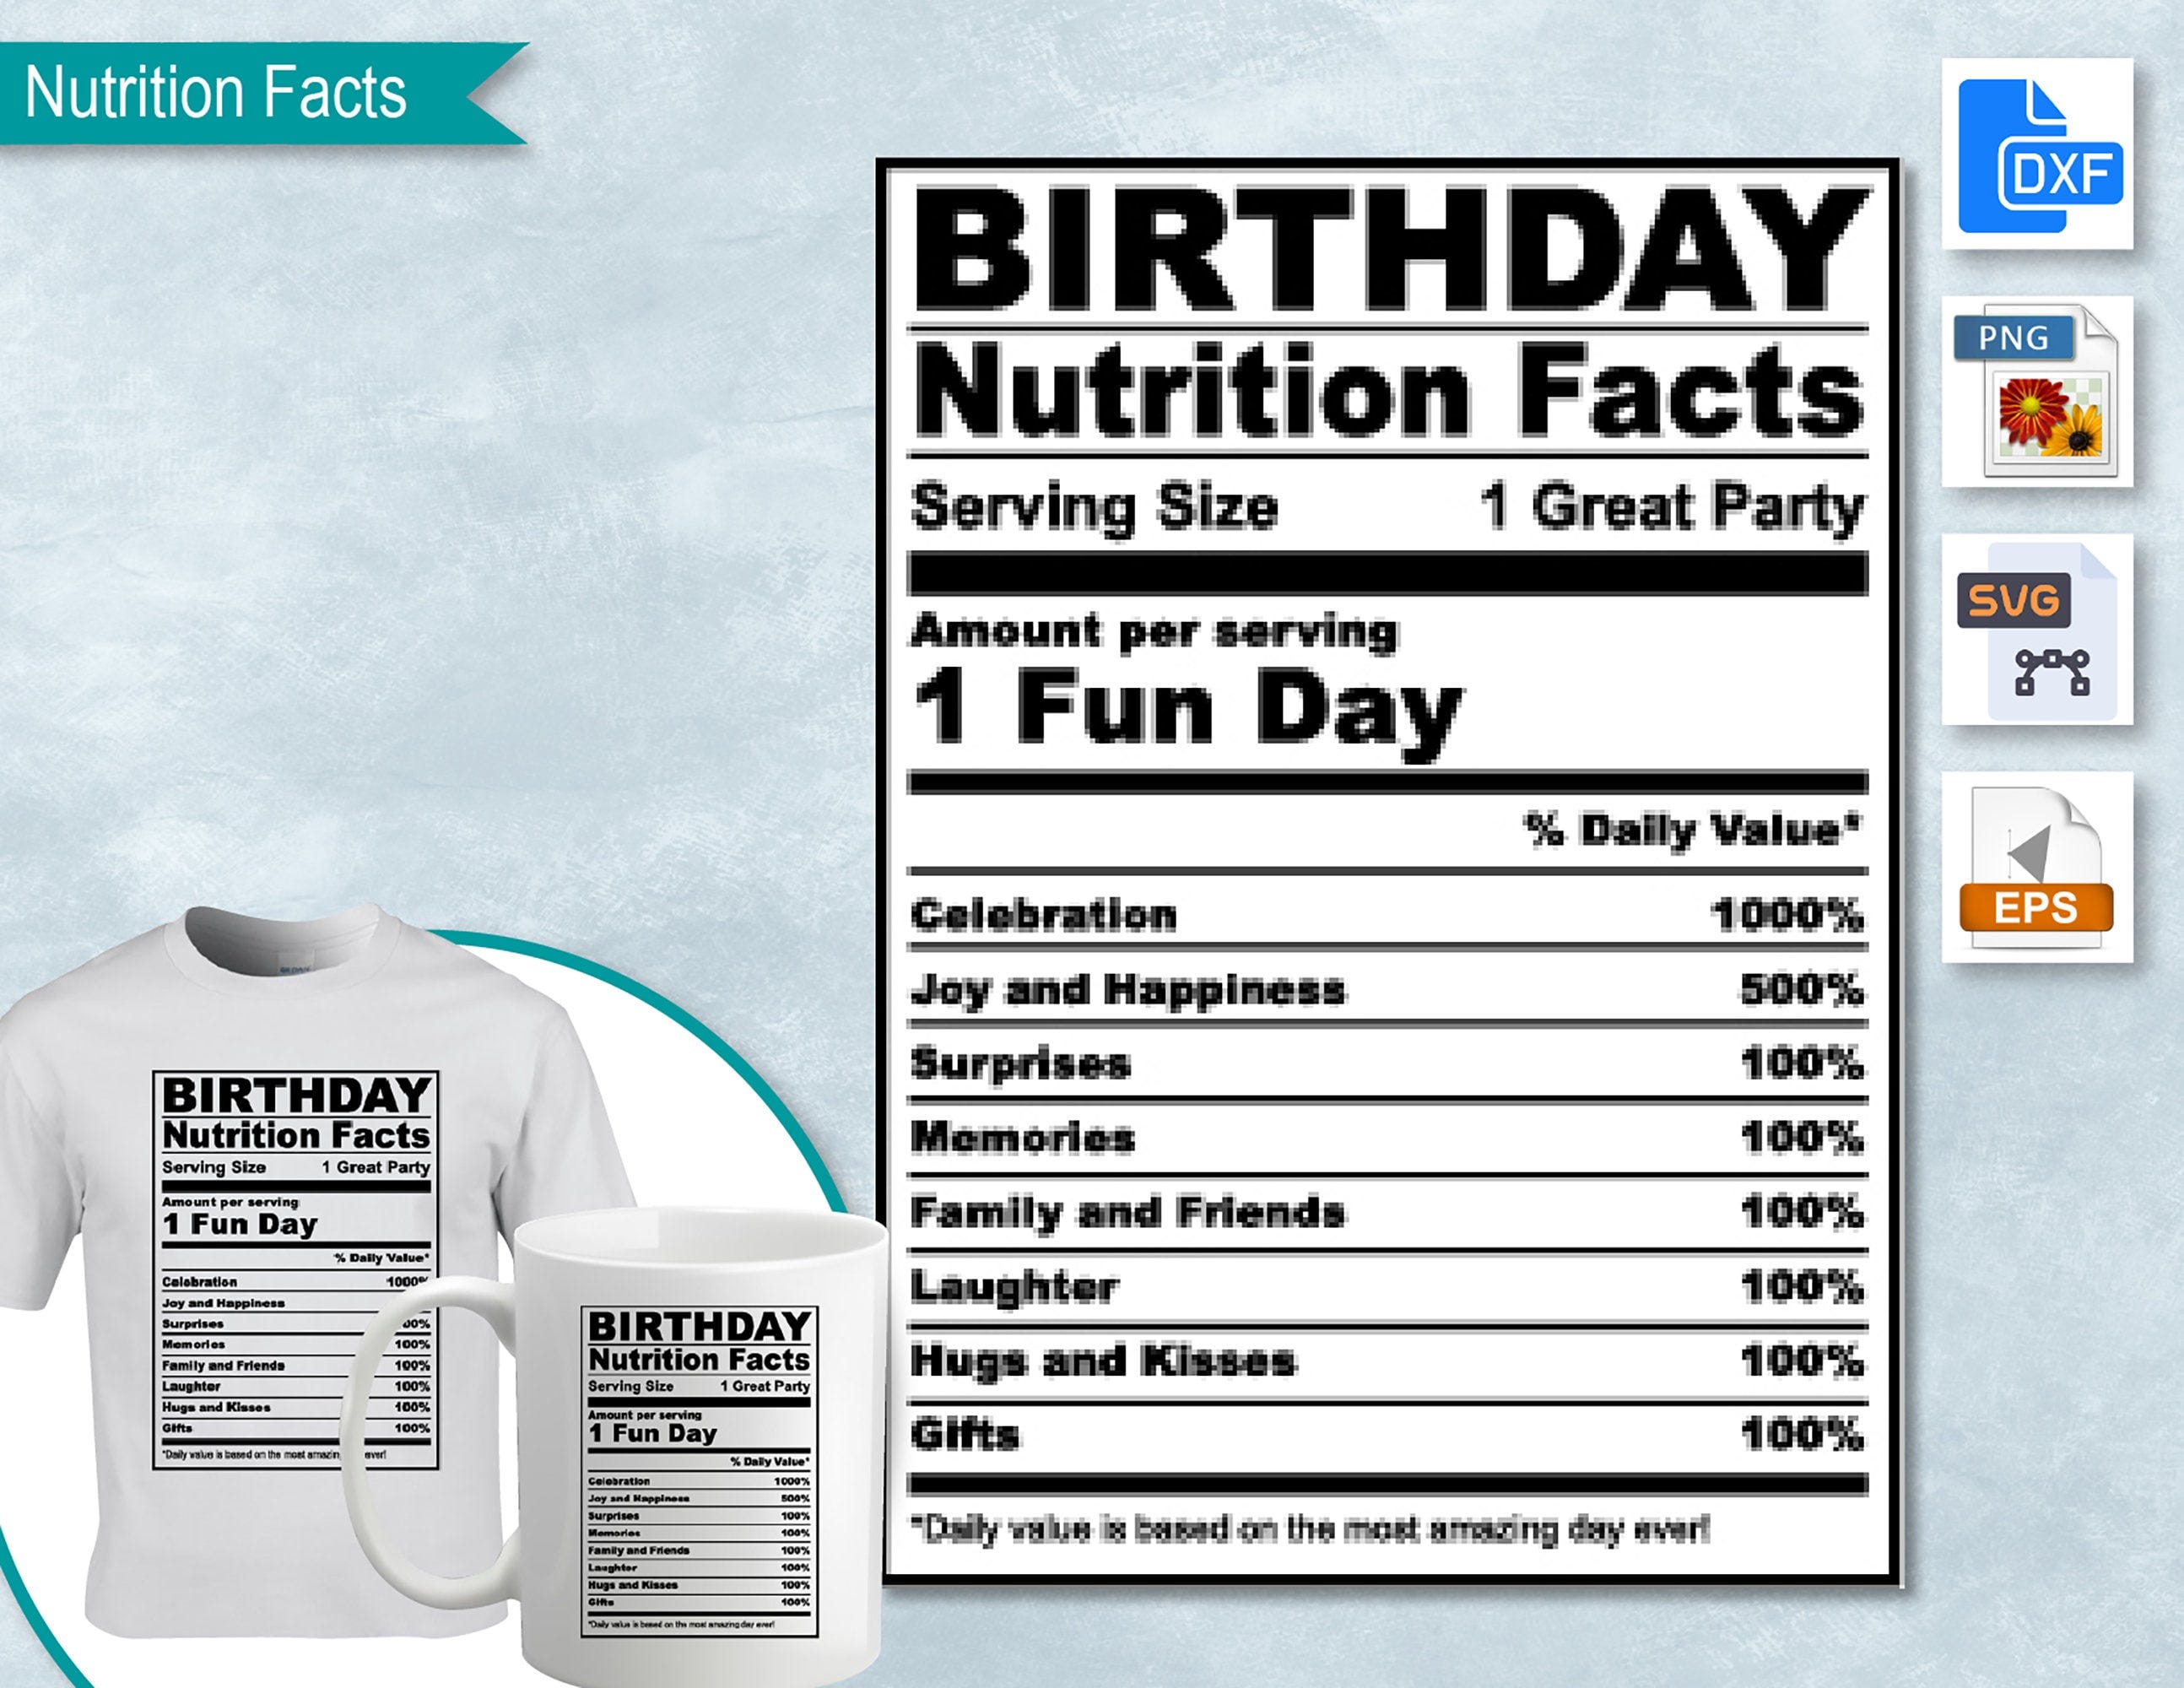 Birthday Nutrition Facts, SVG Nutritional Fact Label Sublimation Template, Printable, DIY, Eps, PNG, SvG, DxF, Cricut, Silhouette